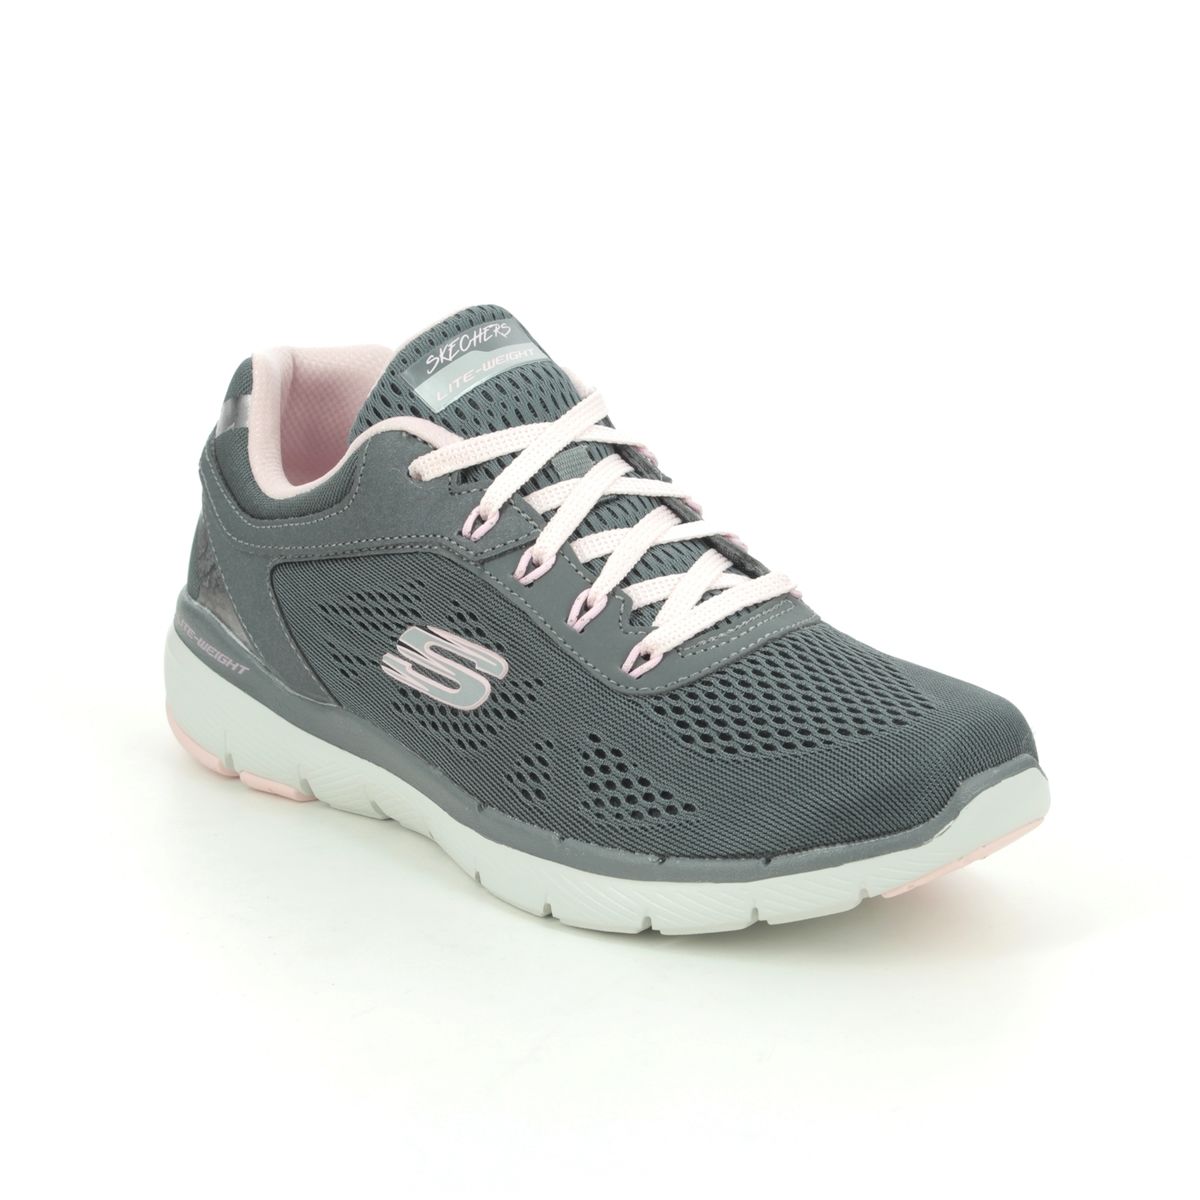 Skechers Moving Fast Flex Appeal 13059 CCPK Charcoal trainers